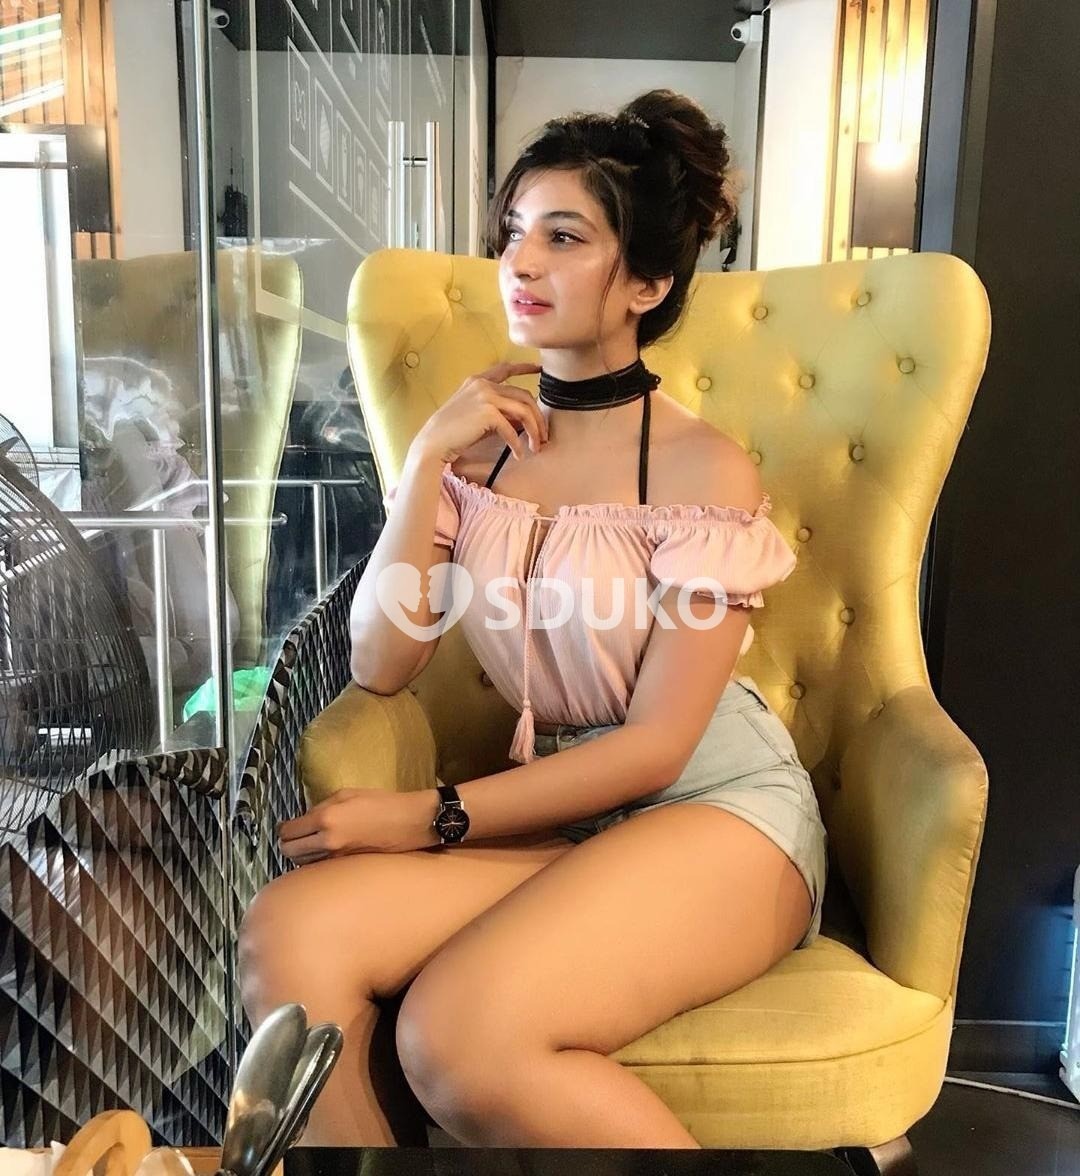 Rohtak 💯✅Genuine⏩  NOW' VIP TODAY LOW PRICE/TOP INDEPENDENCE VIP (ESCORT) BEST HIGH PROFILE GIRL'S AVAILABLE CALL